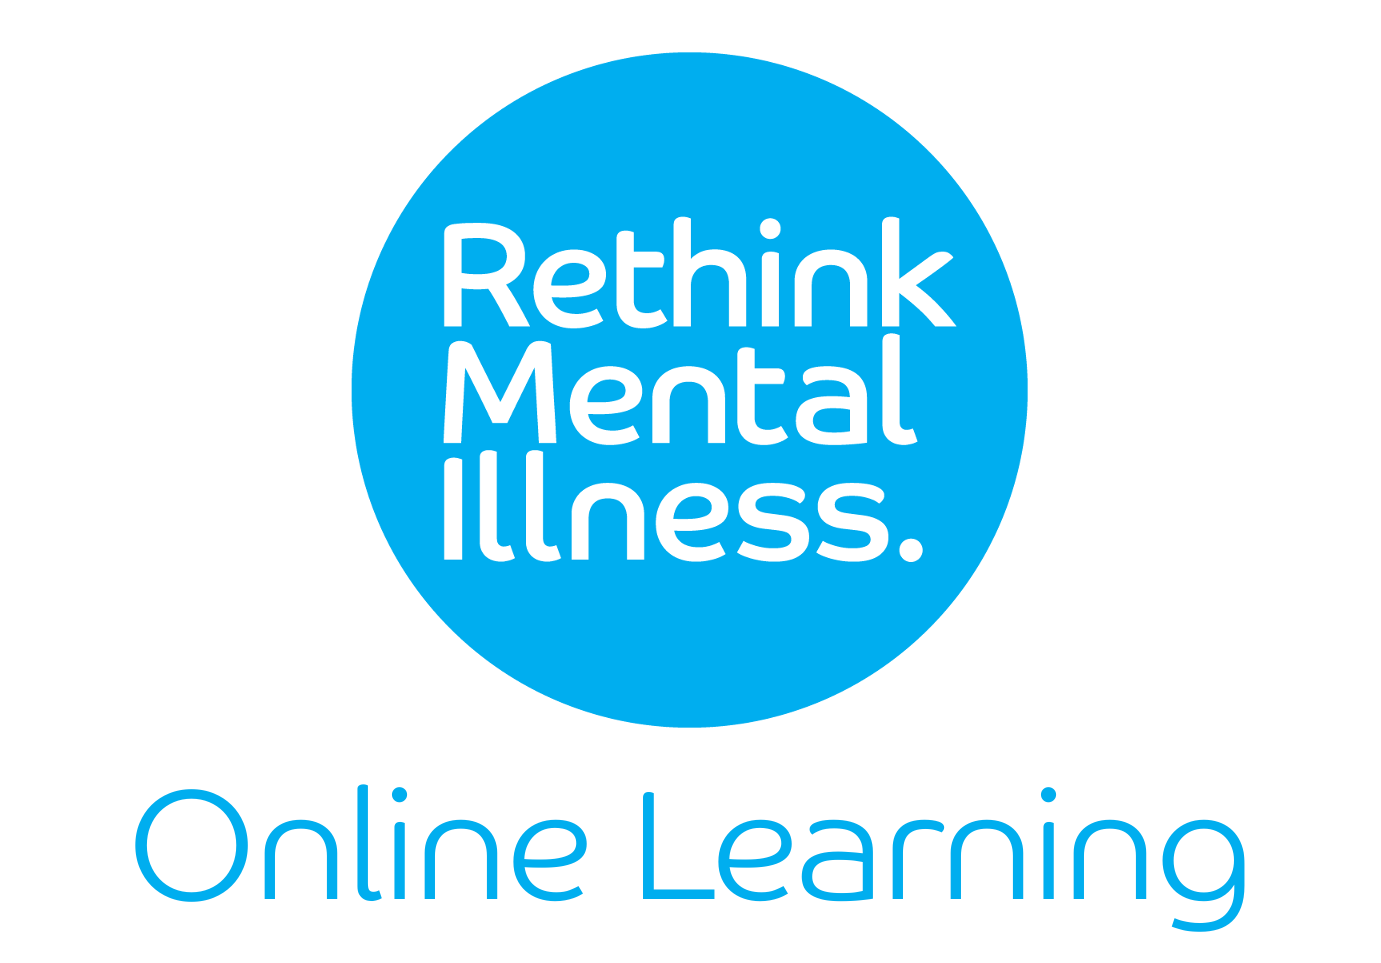 Welcome to Rethink Mental Illness e-learning